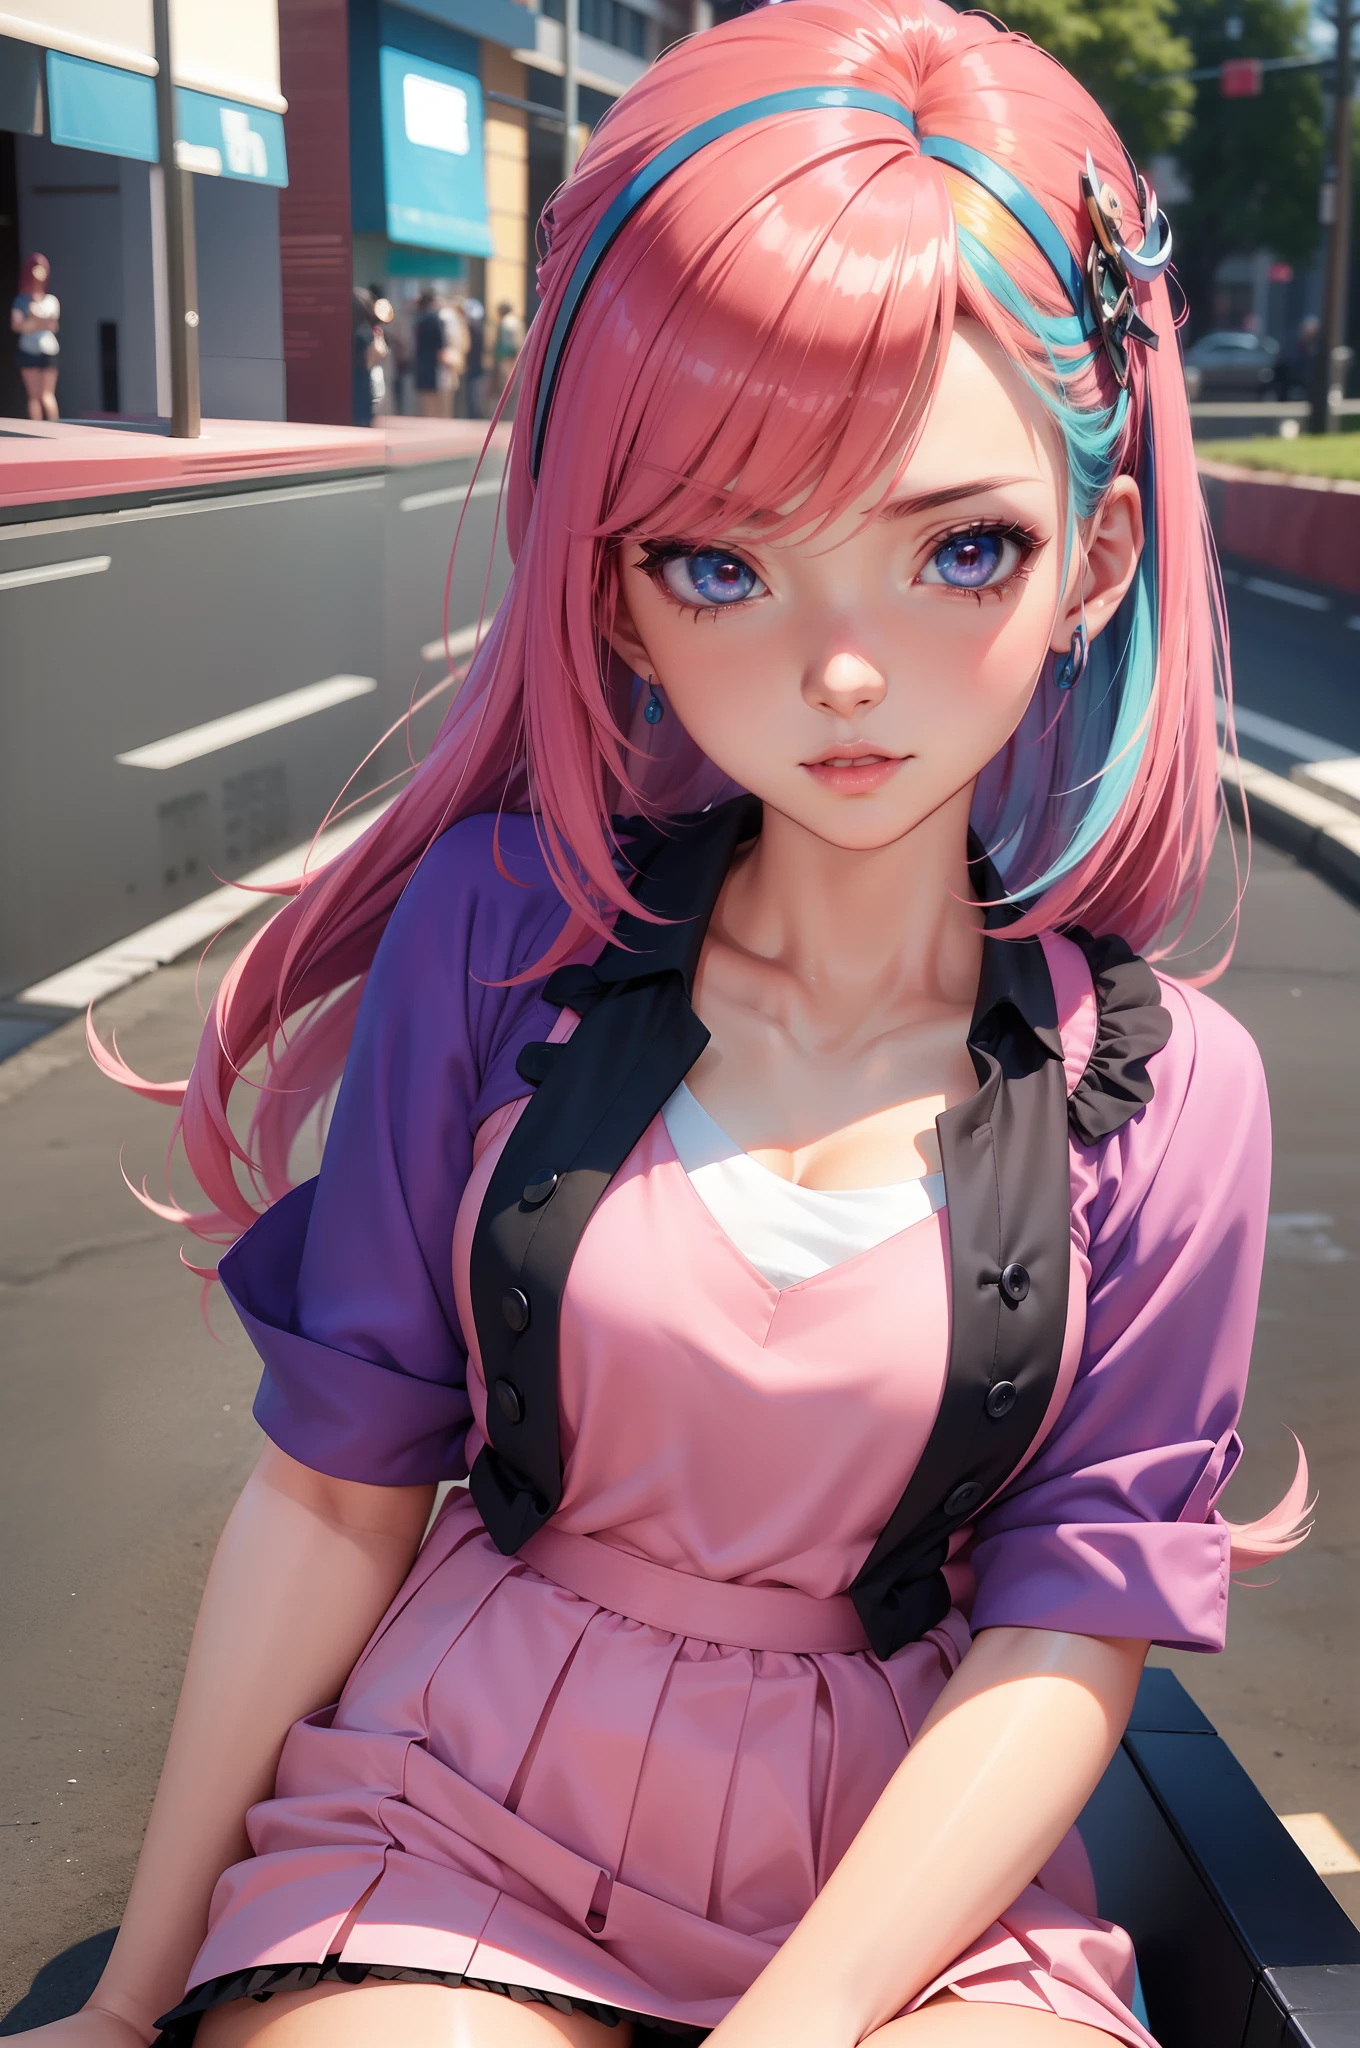 (hetetochromia), anime with pink hair and blue shirt holding a soccer ball, photorealistic anime girl rendering, render of a cute 3d anime girl, 8k portrait render, realistic anime 3d style, marin kitagawa fanart, close up of a young anime girl, anime styled 3d, April render, smooth anime cg art, 3d anime